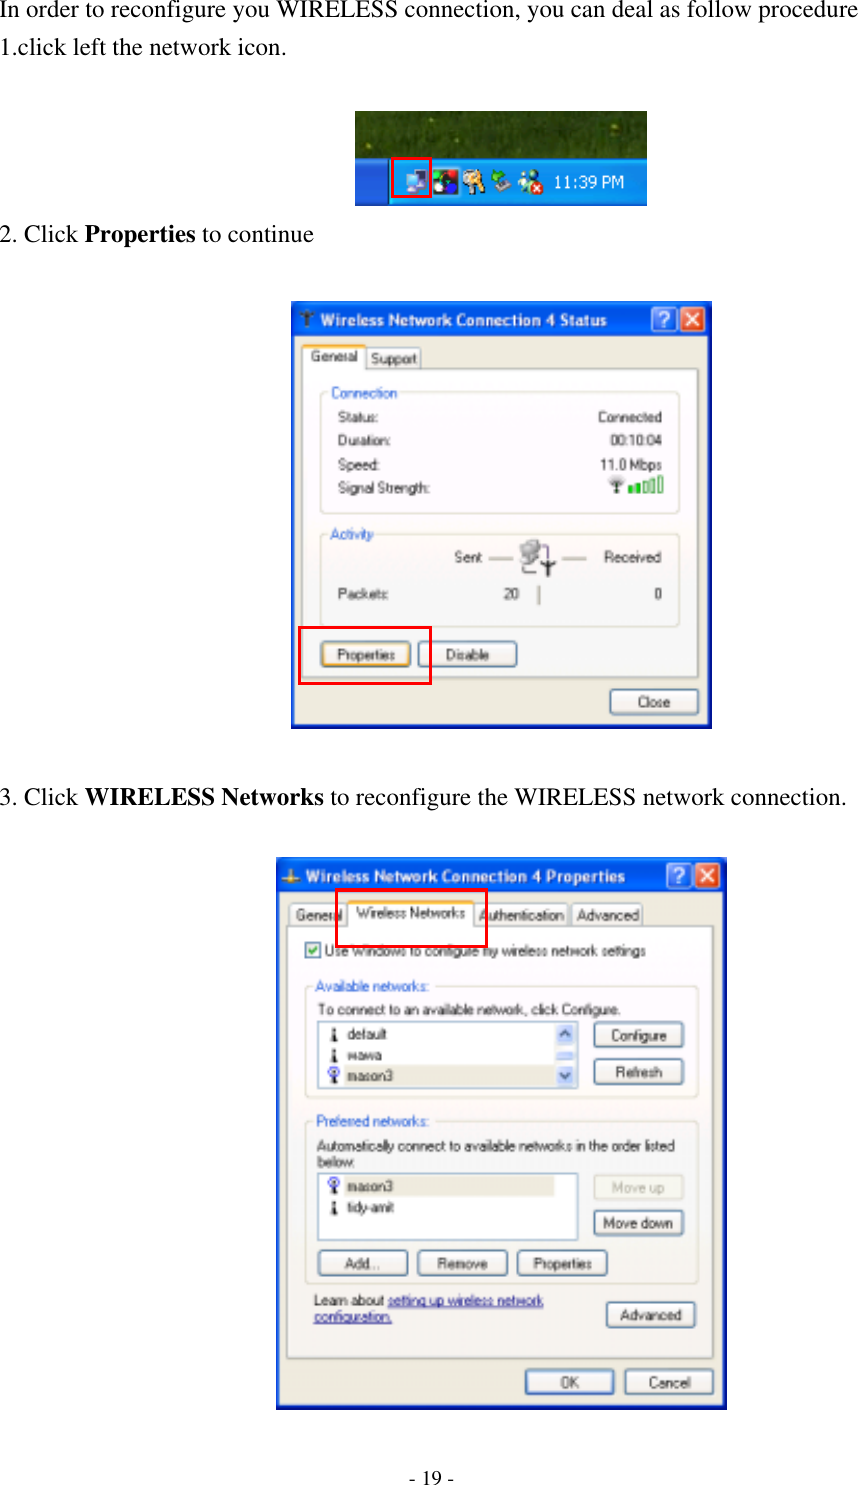    - 19 - In order to reconfigure you WIRELESS connection, you can deal as follow procedure 1.click left the network icon.   2. Click Properties to continue    3. Click WIRELESS Networks to reconfigure the WIRELESS network connection.   